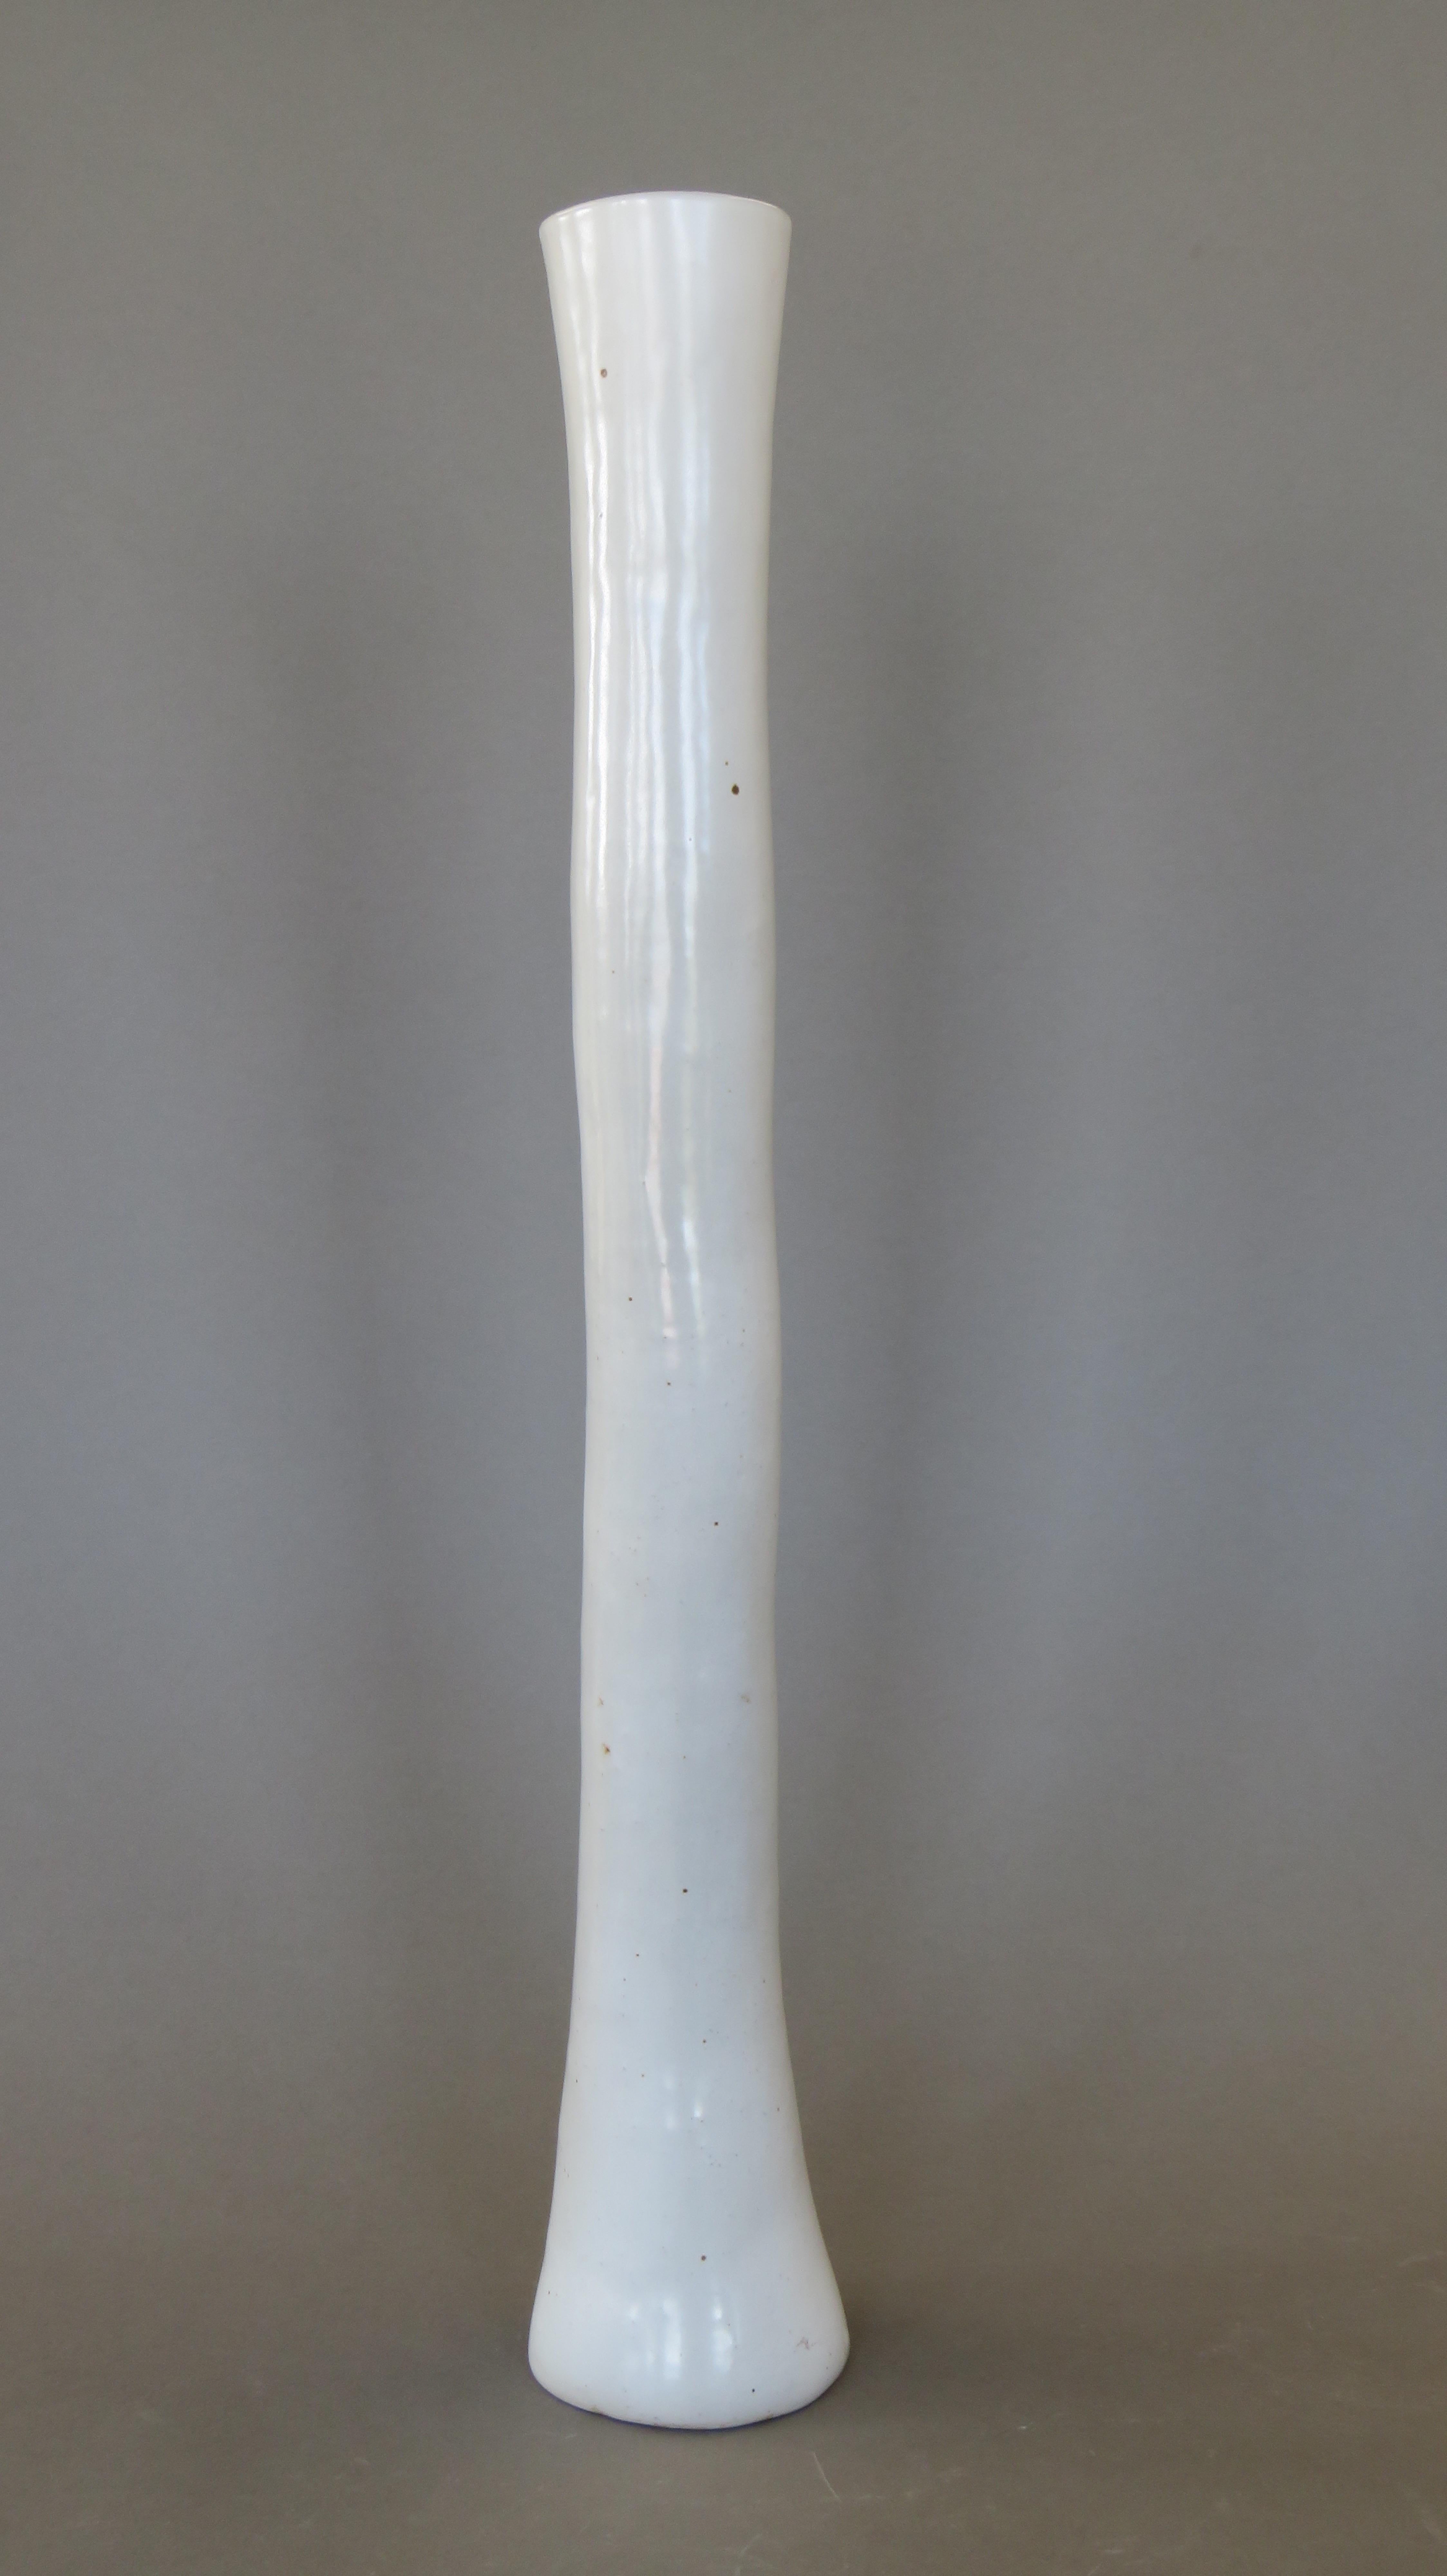 Very Tall, Sculptural Hand Built White Vase.  This series of vases was made as an investigation into functional sculpture, not just as ordinary vases but true statement pieces.  Echoing the flow of air or the sound of music, these elongated vessels,